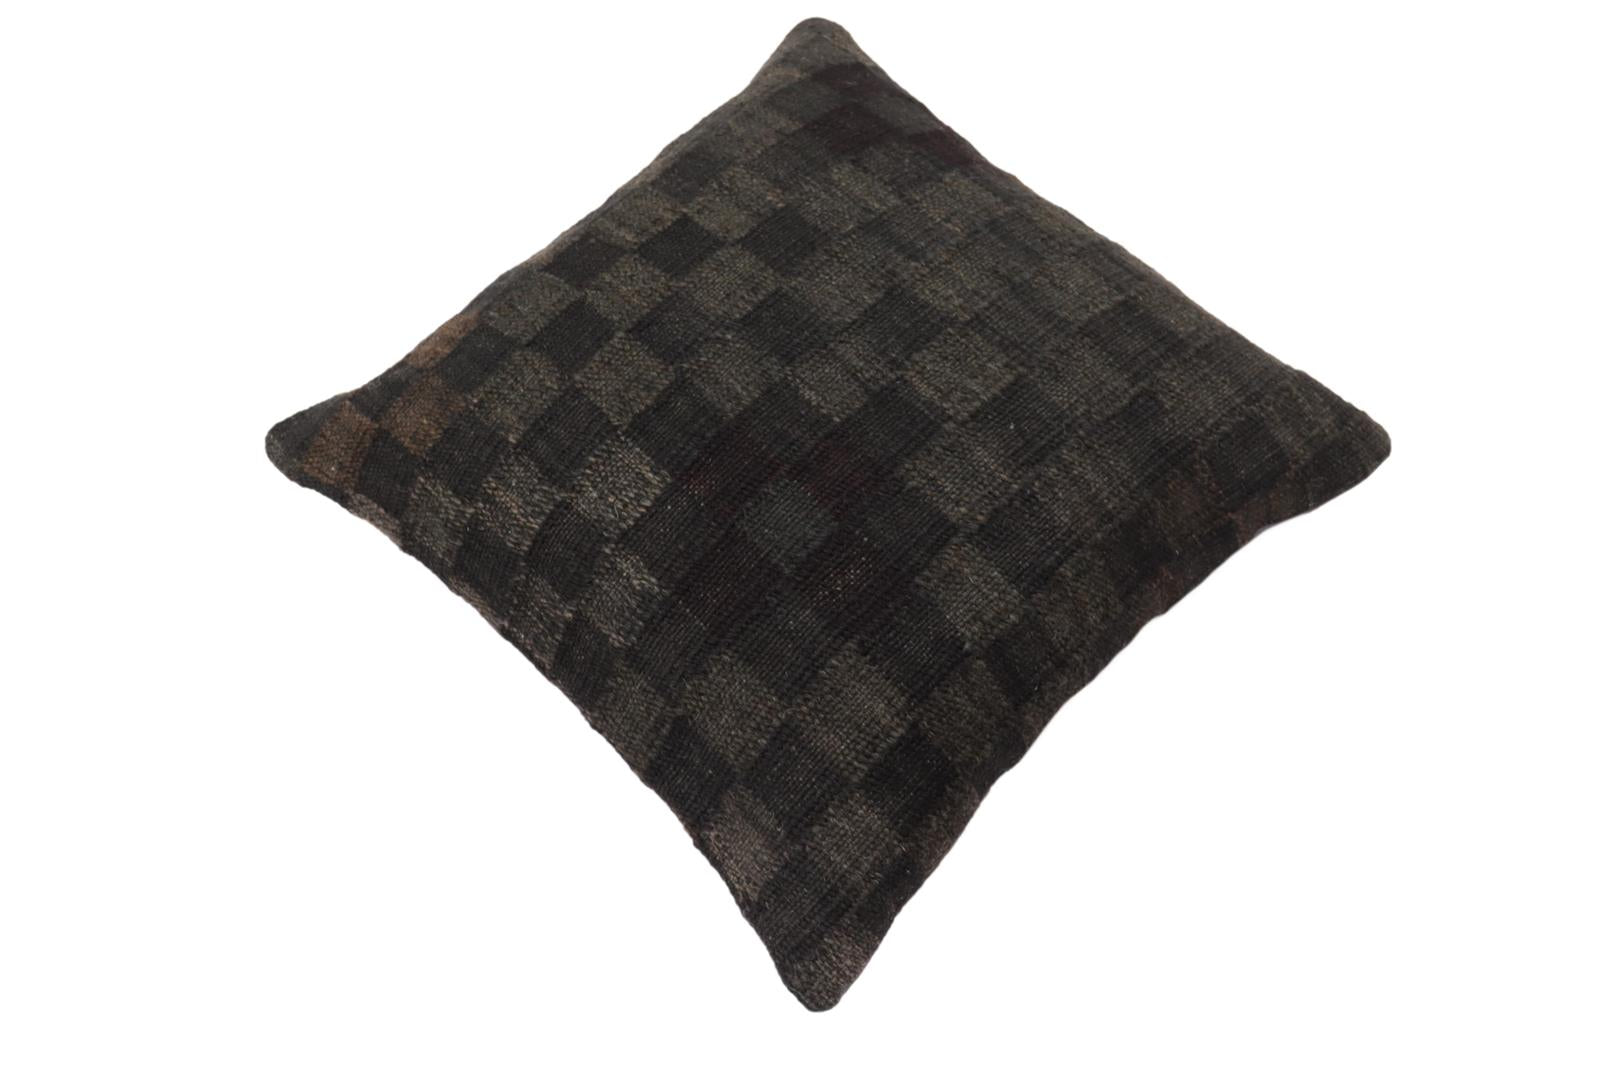 handmade Traditional Pillow Black Brown Hand-Woven SQUARE 100% WOOL Hand woven turkish pillow2' x 2'